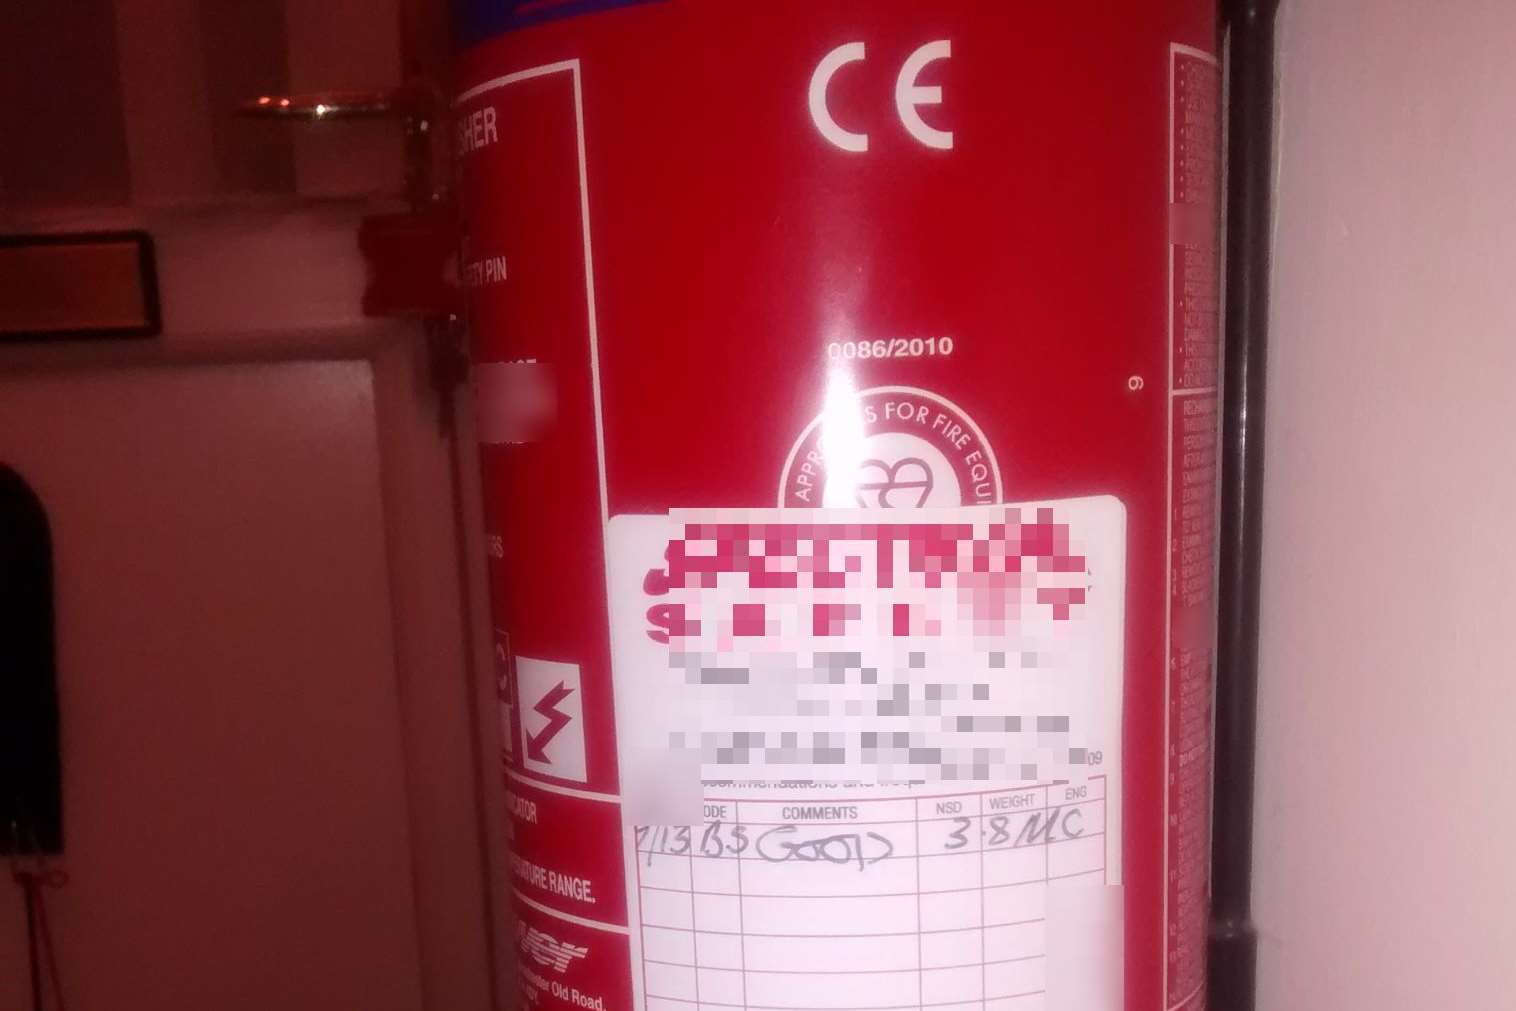 The date of the last inspection of this fire extinguisher - September 2013